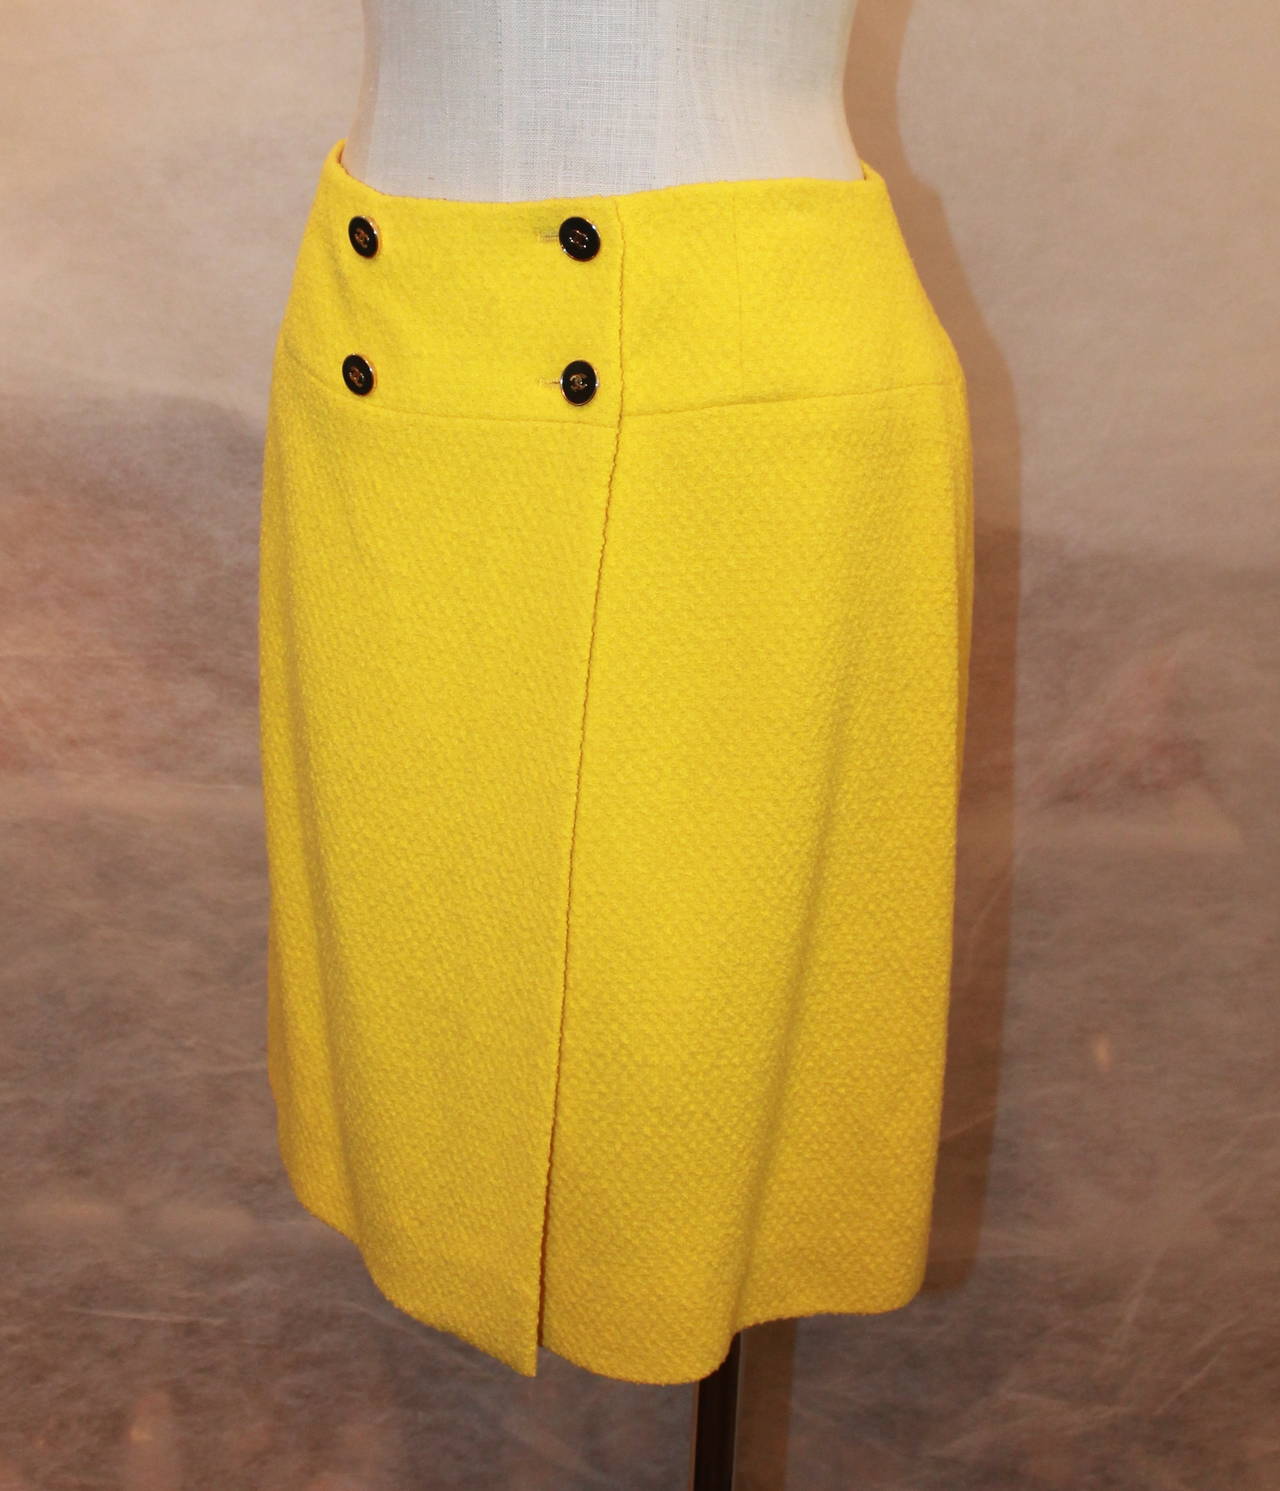 Chanel 1980's Vintage Yellow Tweed Wrap Skirt - 38. This skirt is in very good condition and is 100% wool with 100% silk lining. It has 4 buttons for closure in the front. 
**There is a matching jacket in stock**

Measurements:
Waist-